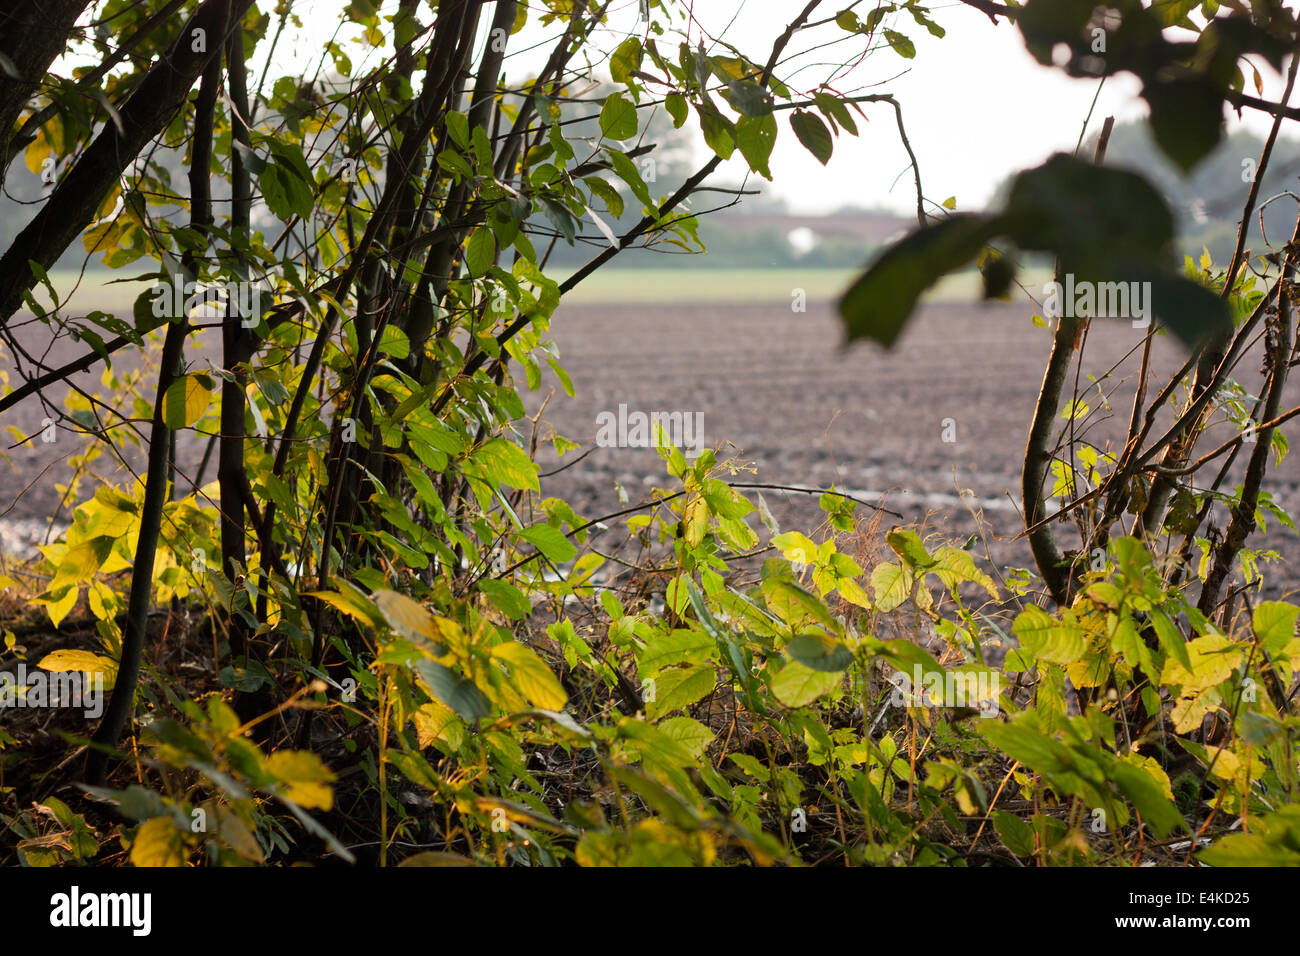 field behind leaves Stock Photo